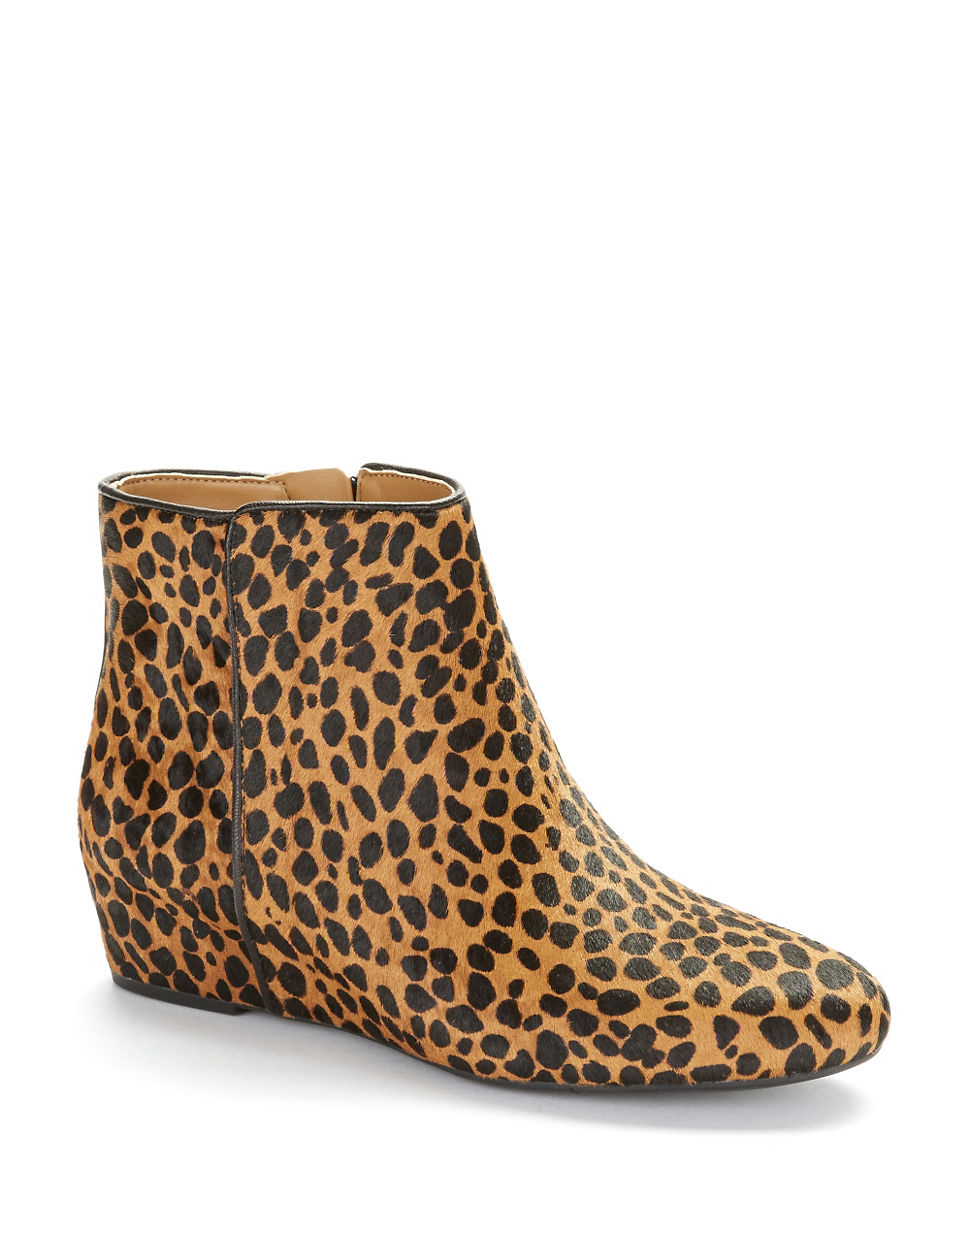 Nine West Metalina Animal Print Ankle Boots in Animal (Leopard) | Lyst